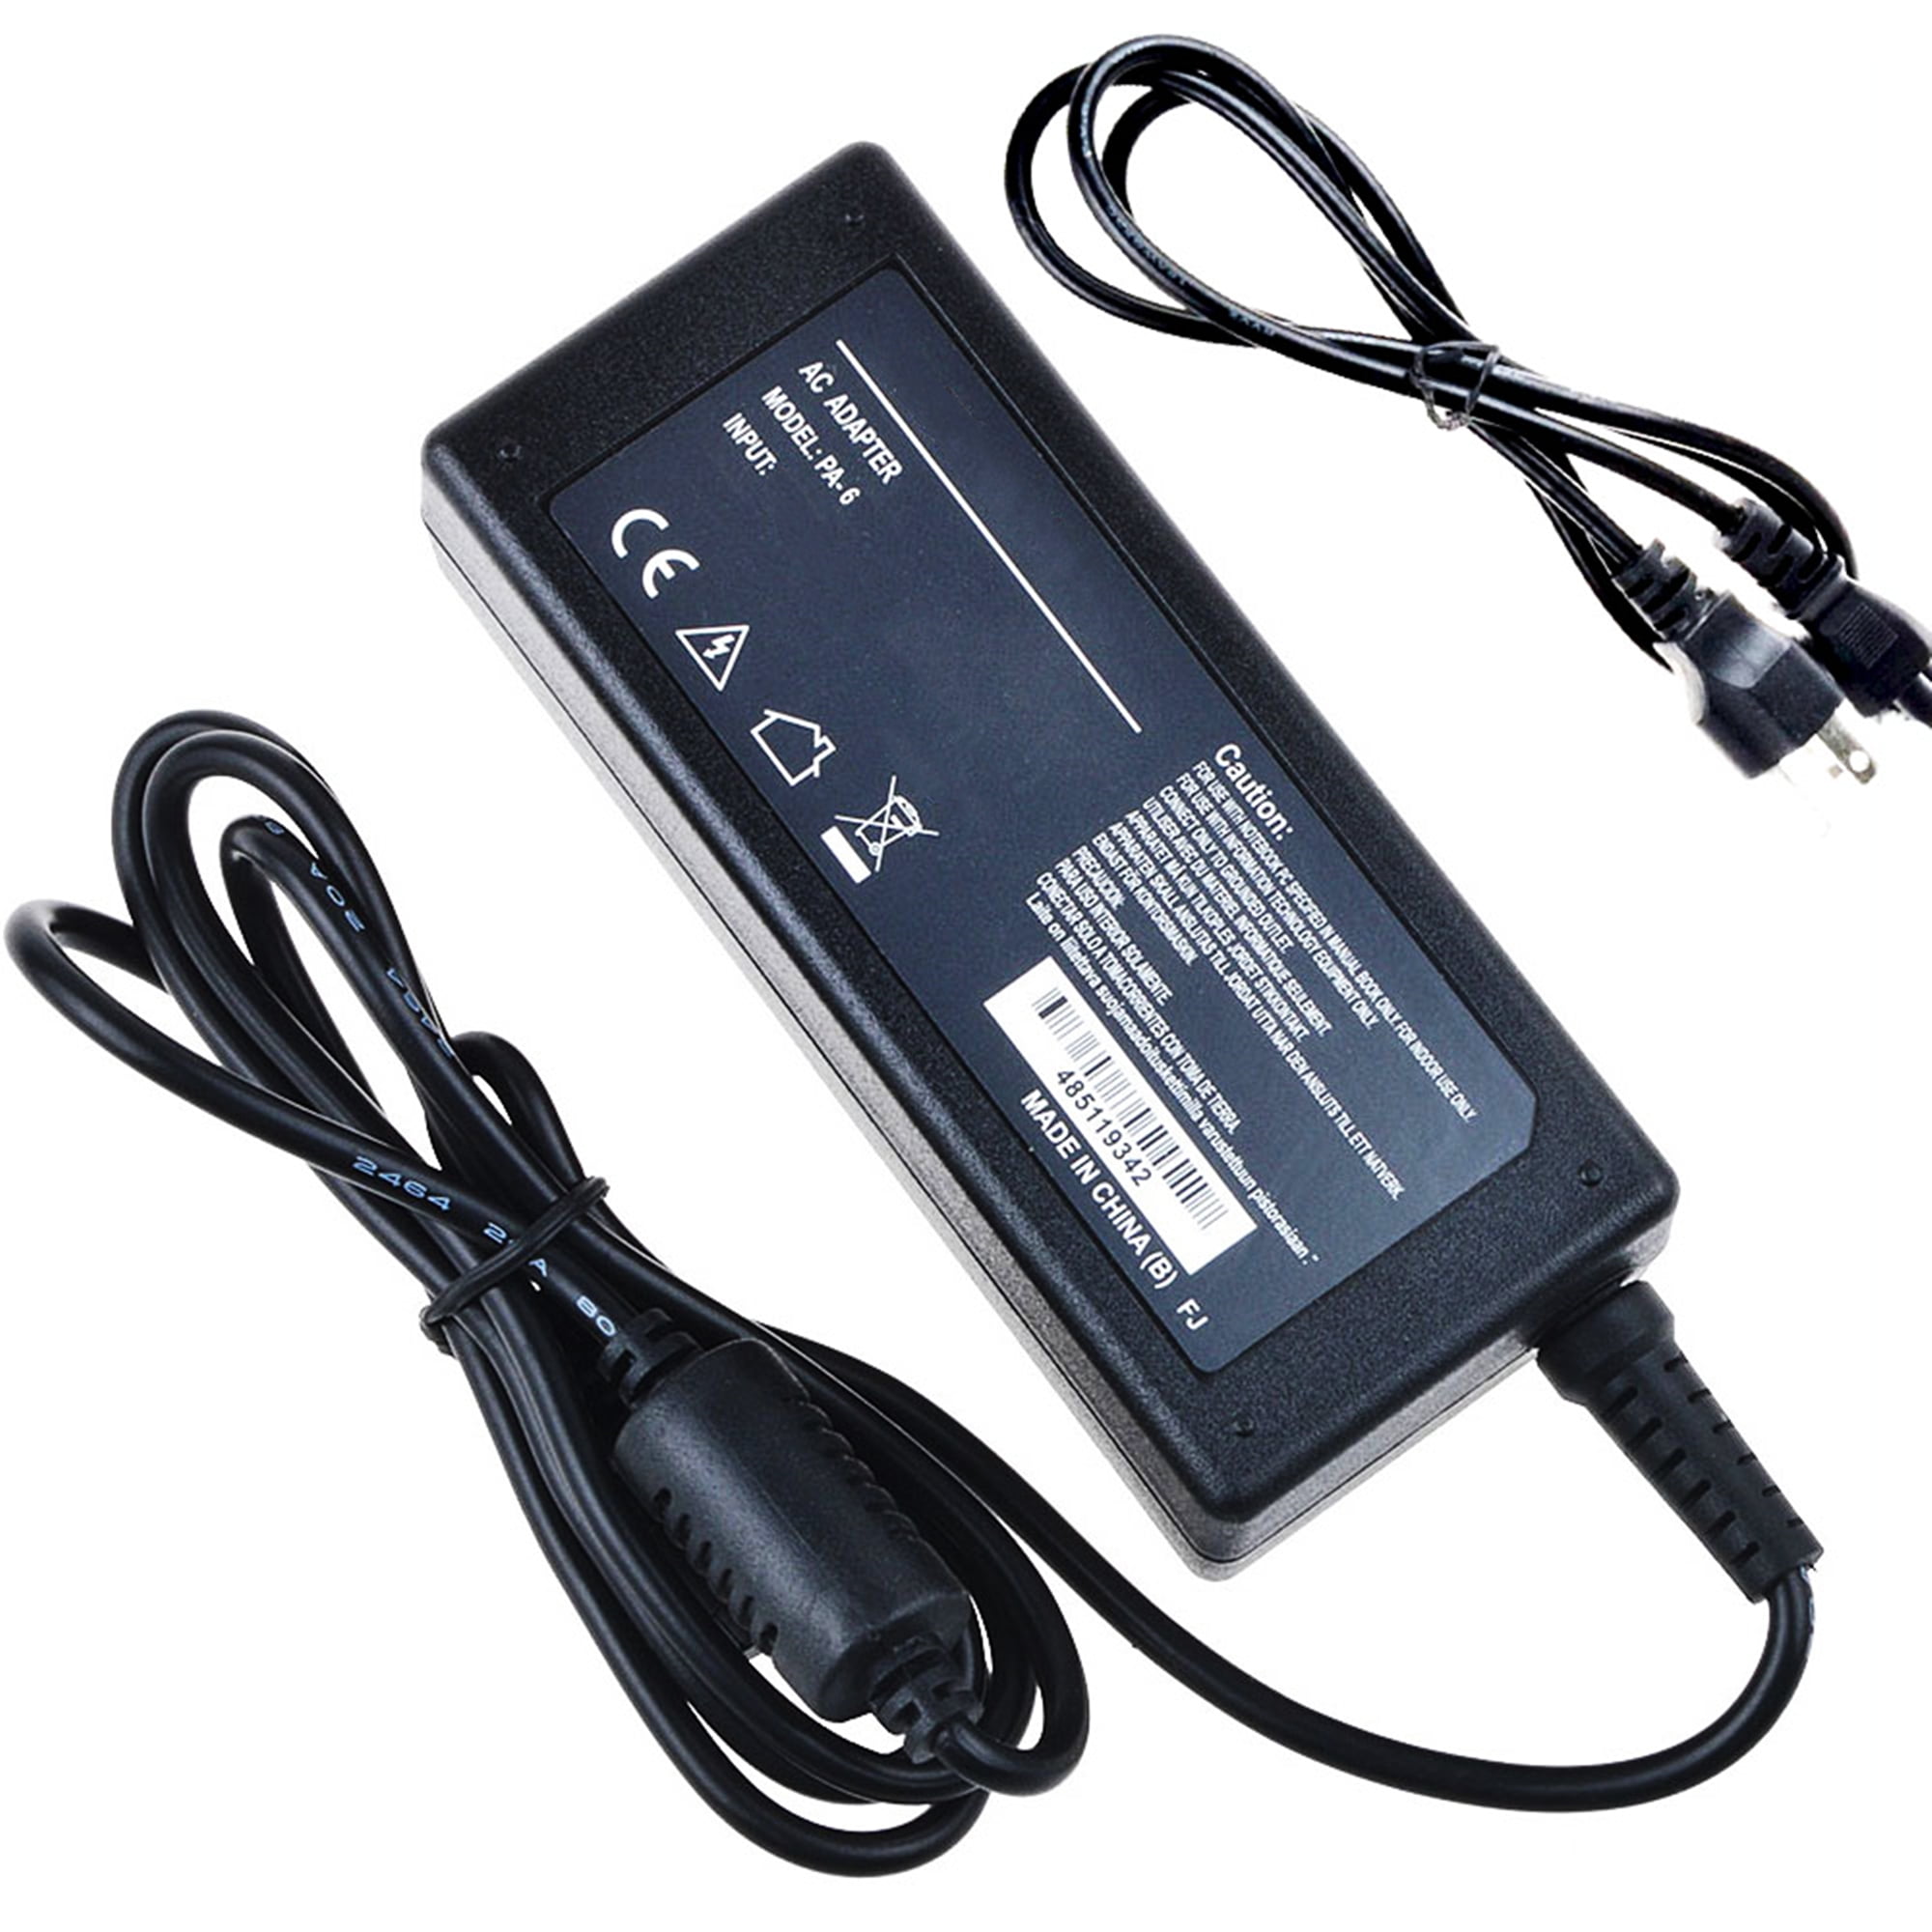 AC Adapter For First Alert H.264 DVR PRO-DC8810-520 Digital Video Record Power 